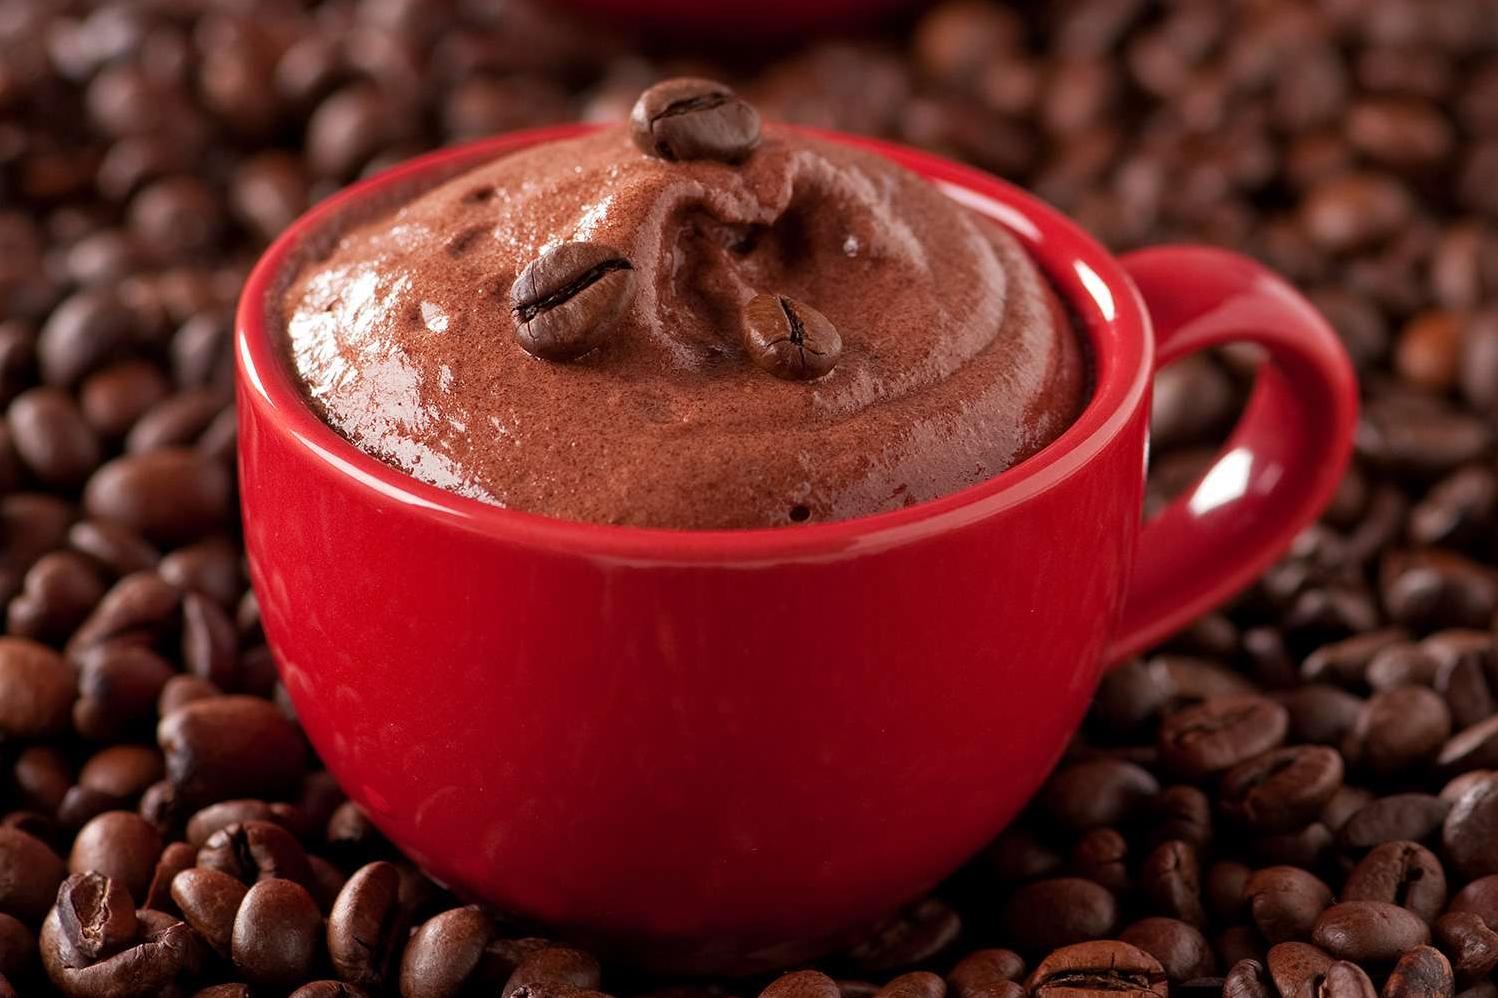  This coffee mousse is a creamy dream you won't forget anytime soon.